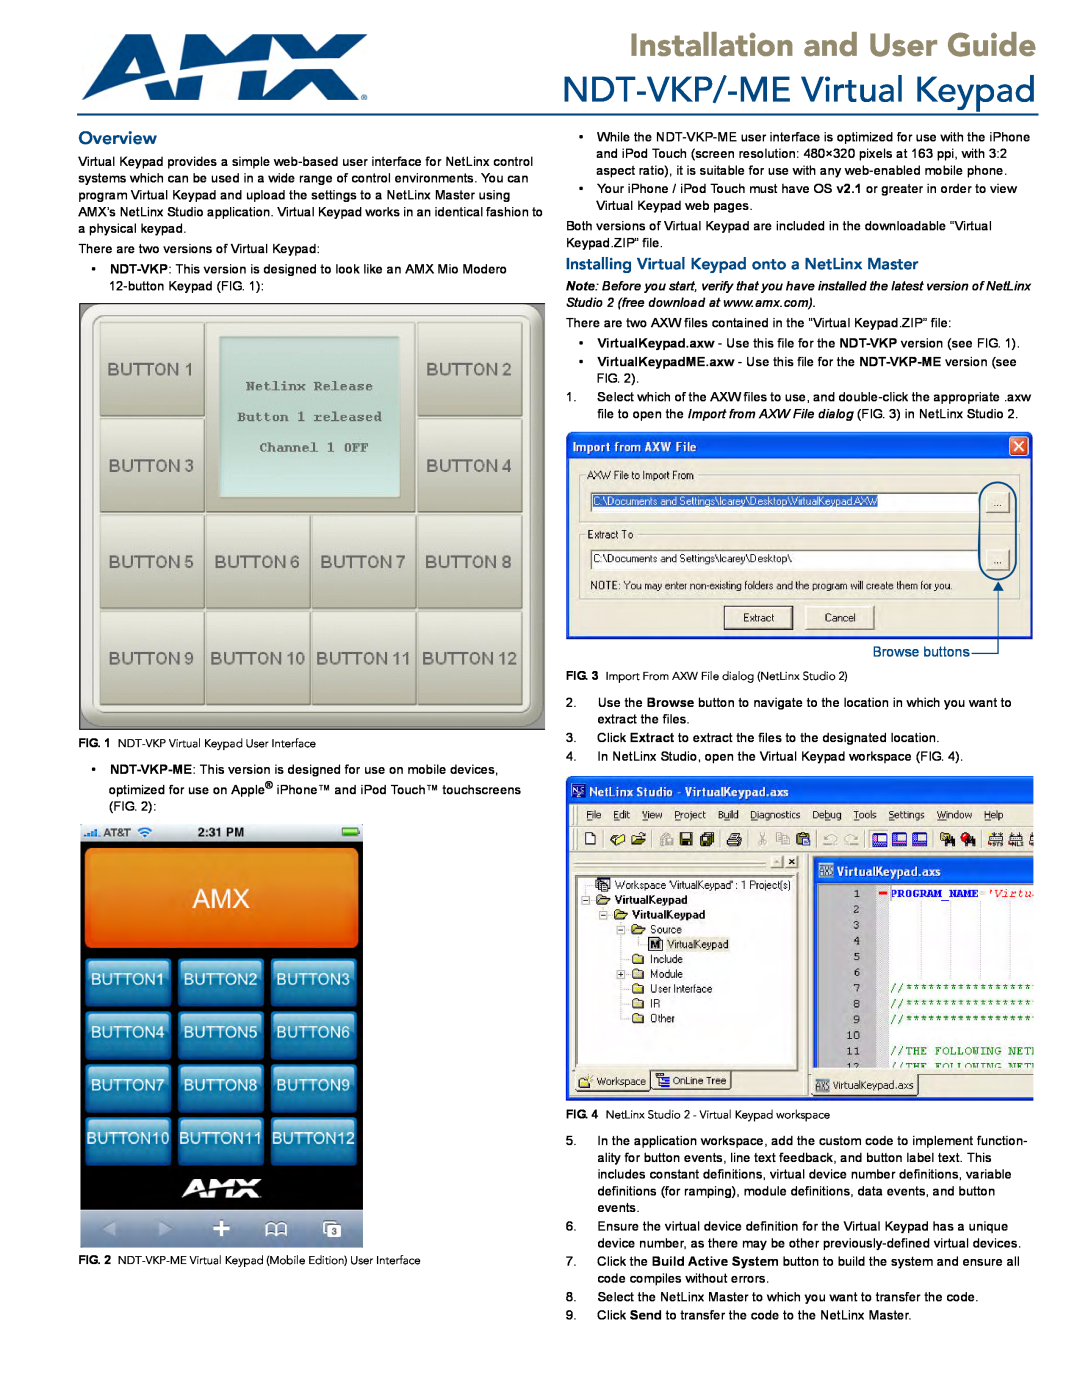 AMX manual Installing Virtual Keypad onto a NetLinx Master, Browse buttons, NDT-VKP/-ME Virtual Keypad, Overview 